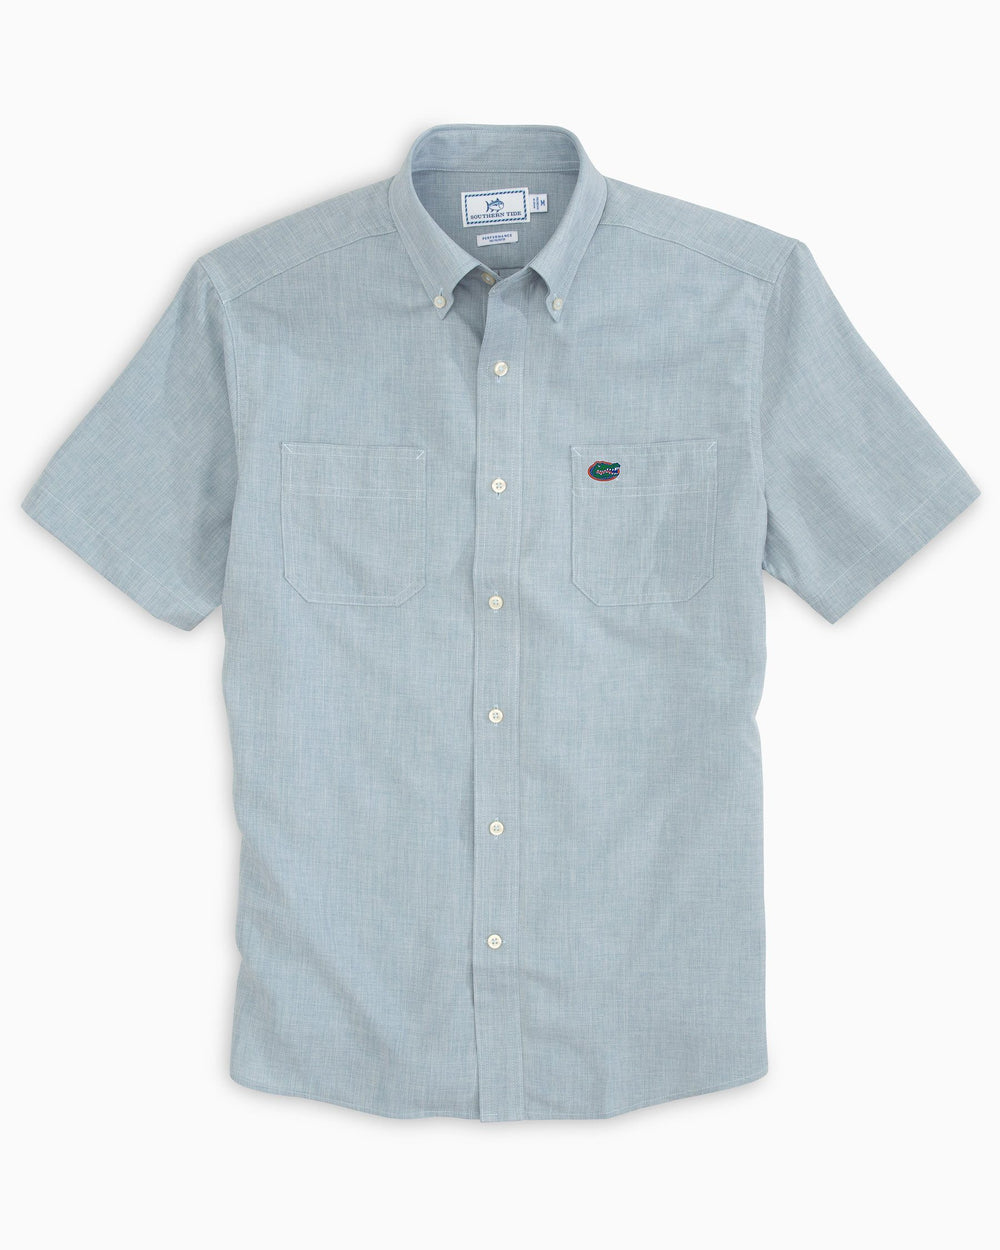 The front of the Florida Gators Short Sleeve Button Down Dock Shirt by Southern Tide - Seagull Grey